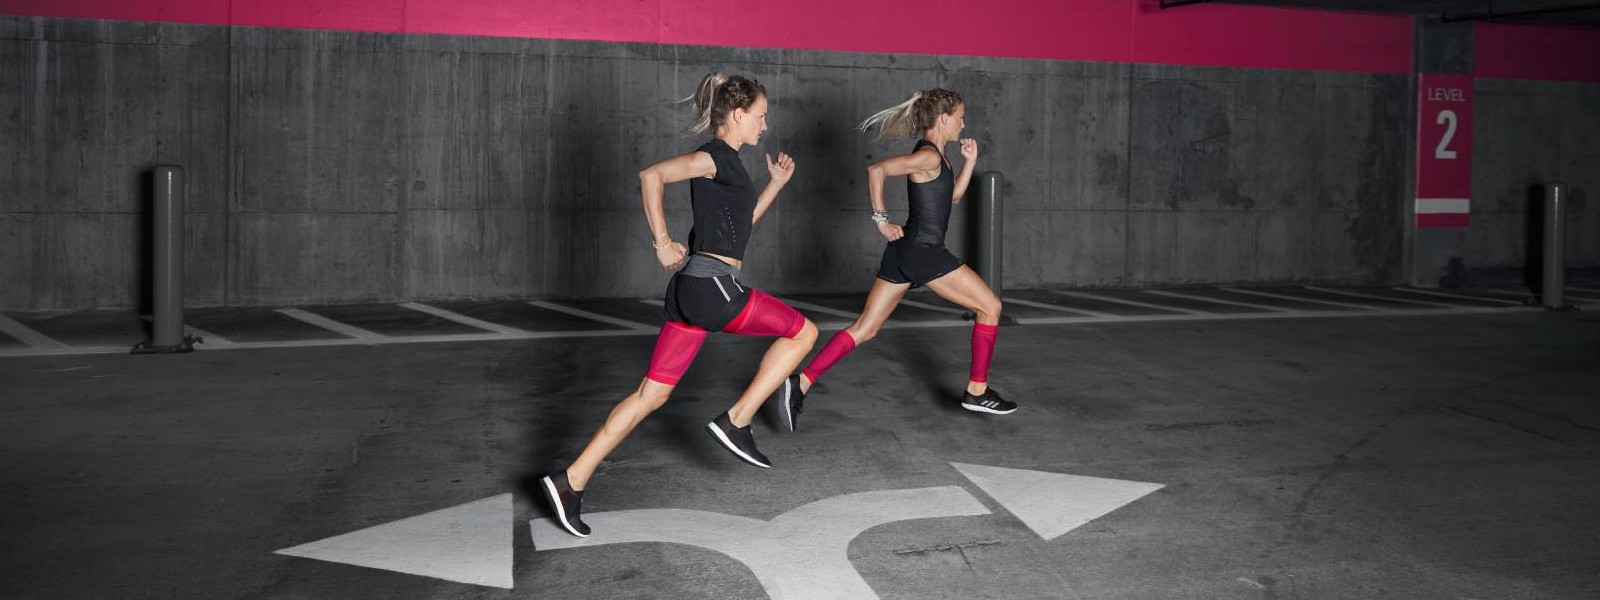 Two runners with pink compression sleeves races through a parking garage